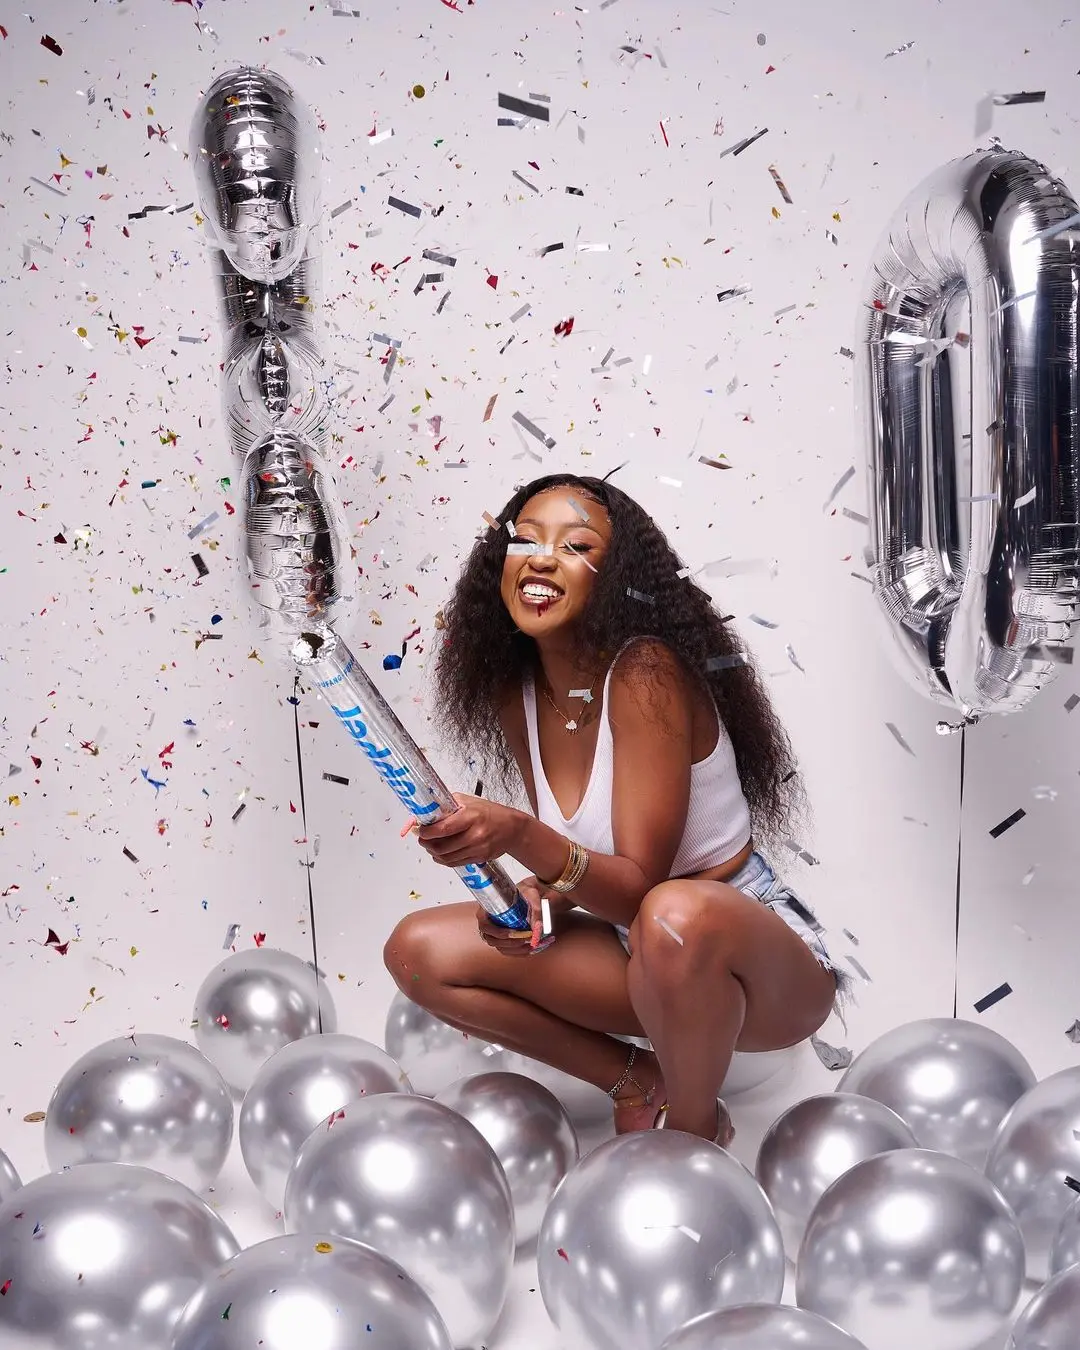 Photos: Sweetest messages pour in for Moozlie as she turns 30